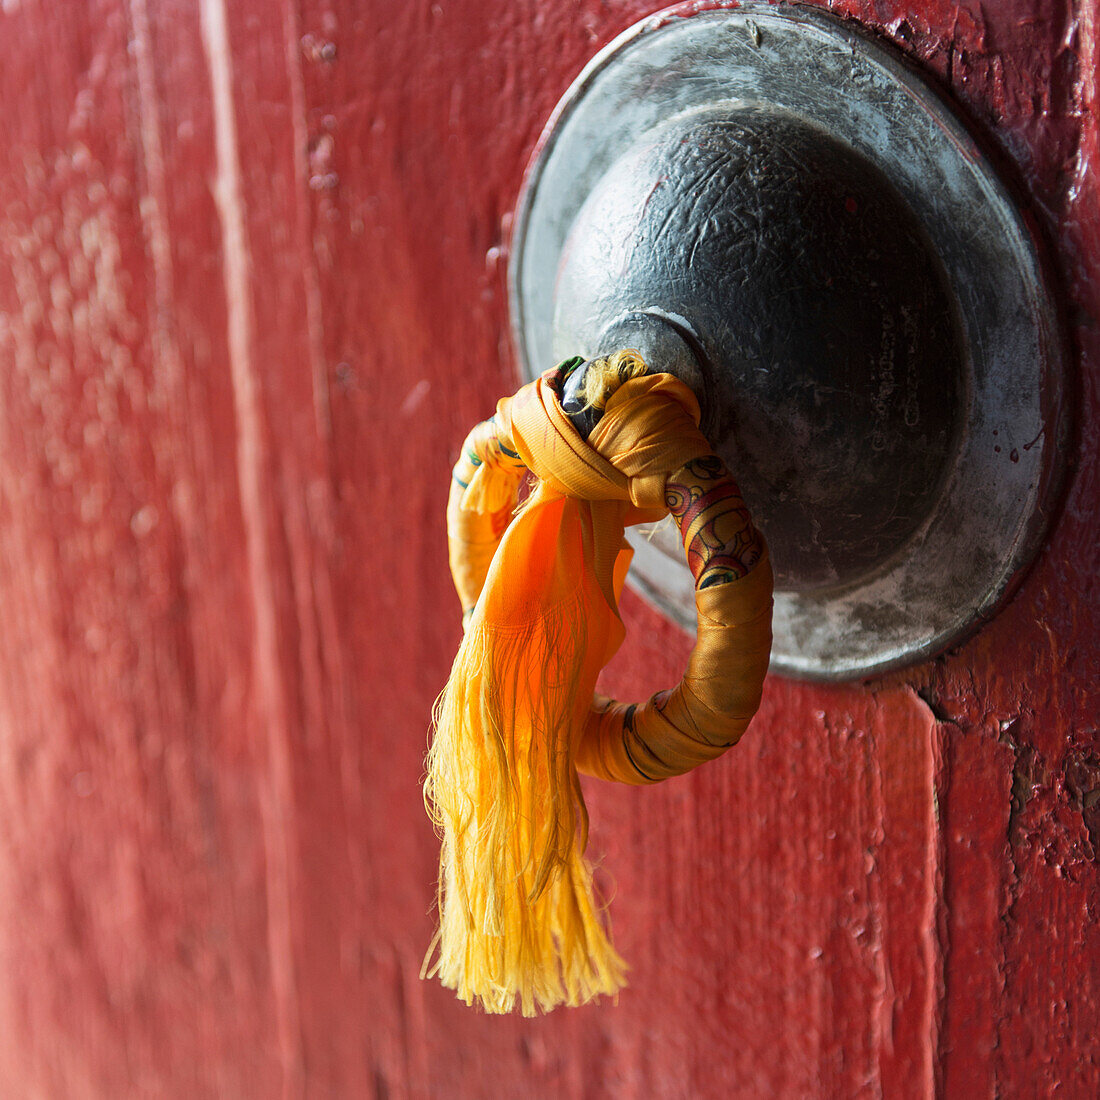 'Gold tassel tied to a doorknob on a red door;Lhasa xizang china'